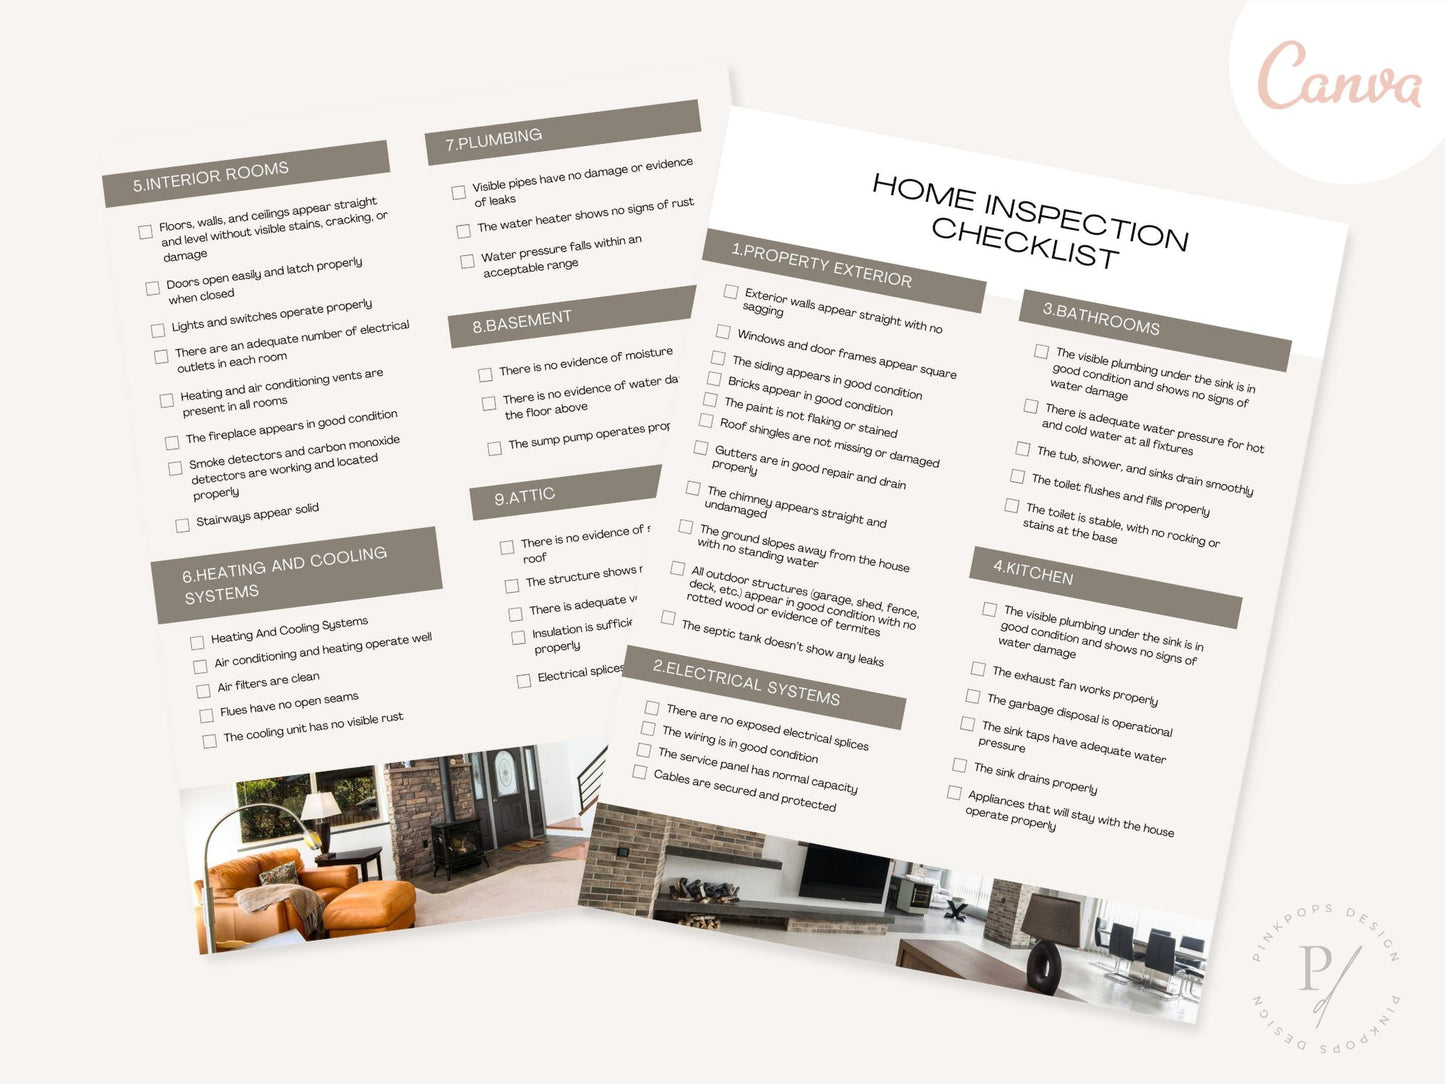 Real Estate Luxury Home Inspection Checklist - Meticulous guide for comprehensive inspections in the luxury real estate market.